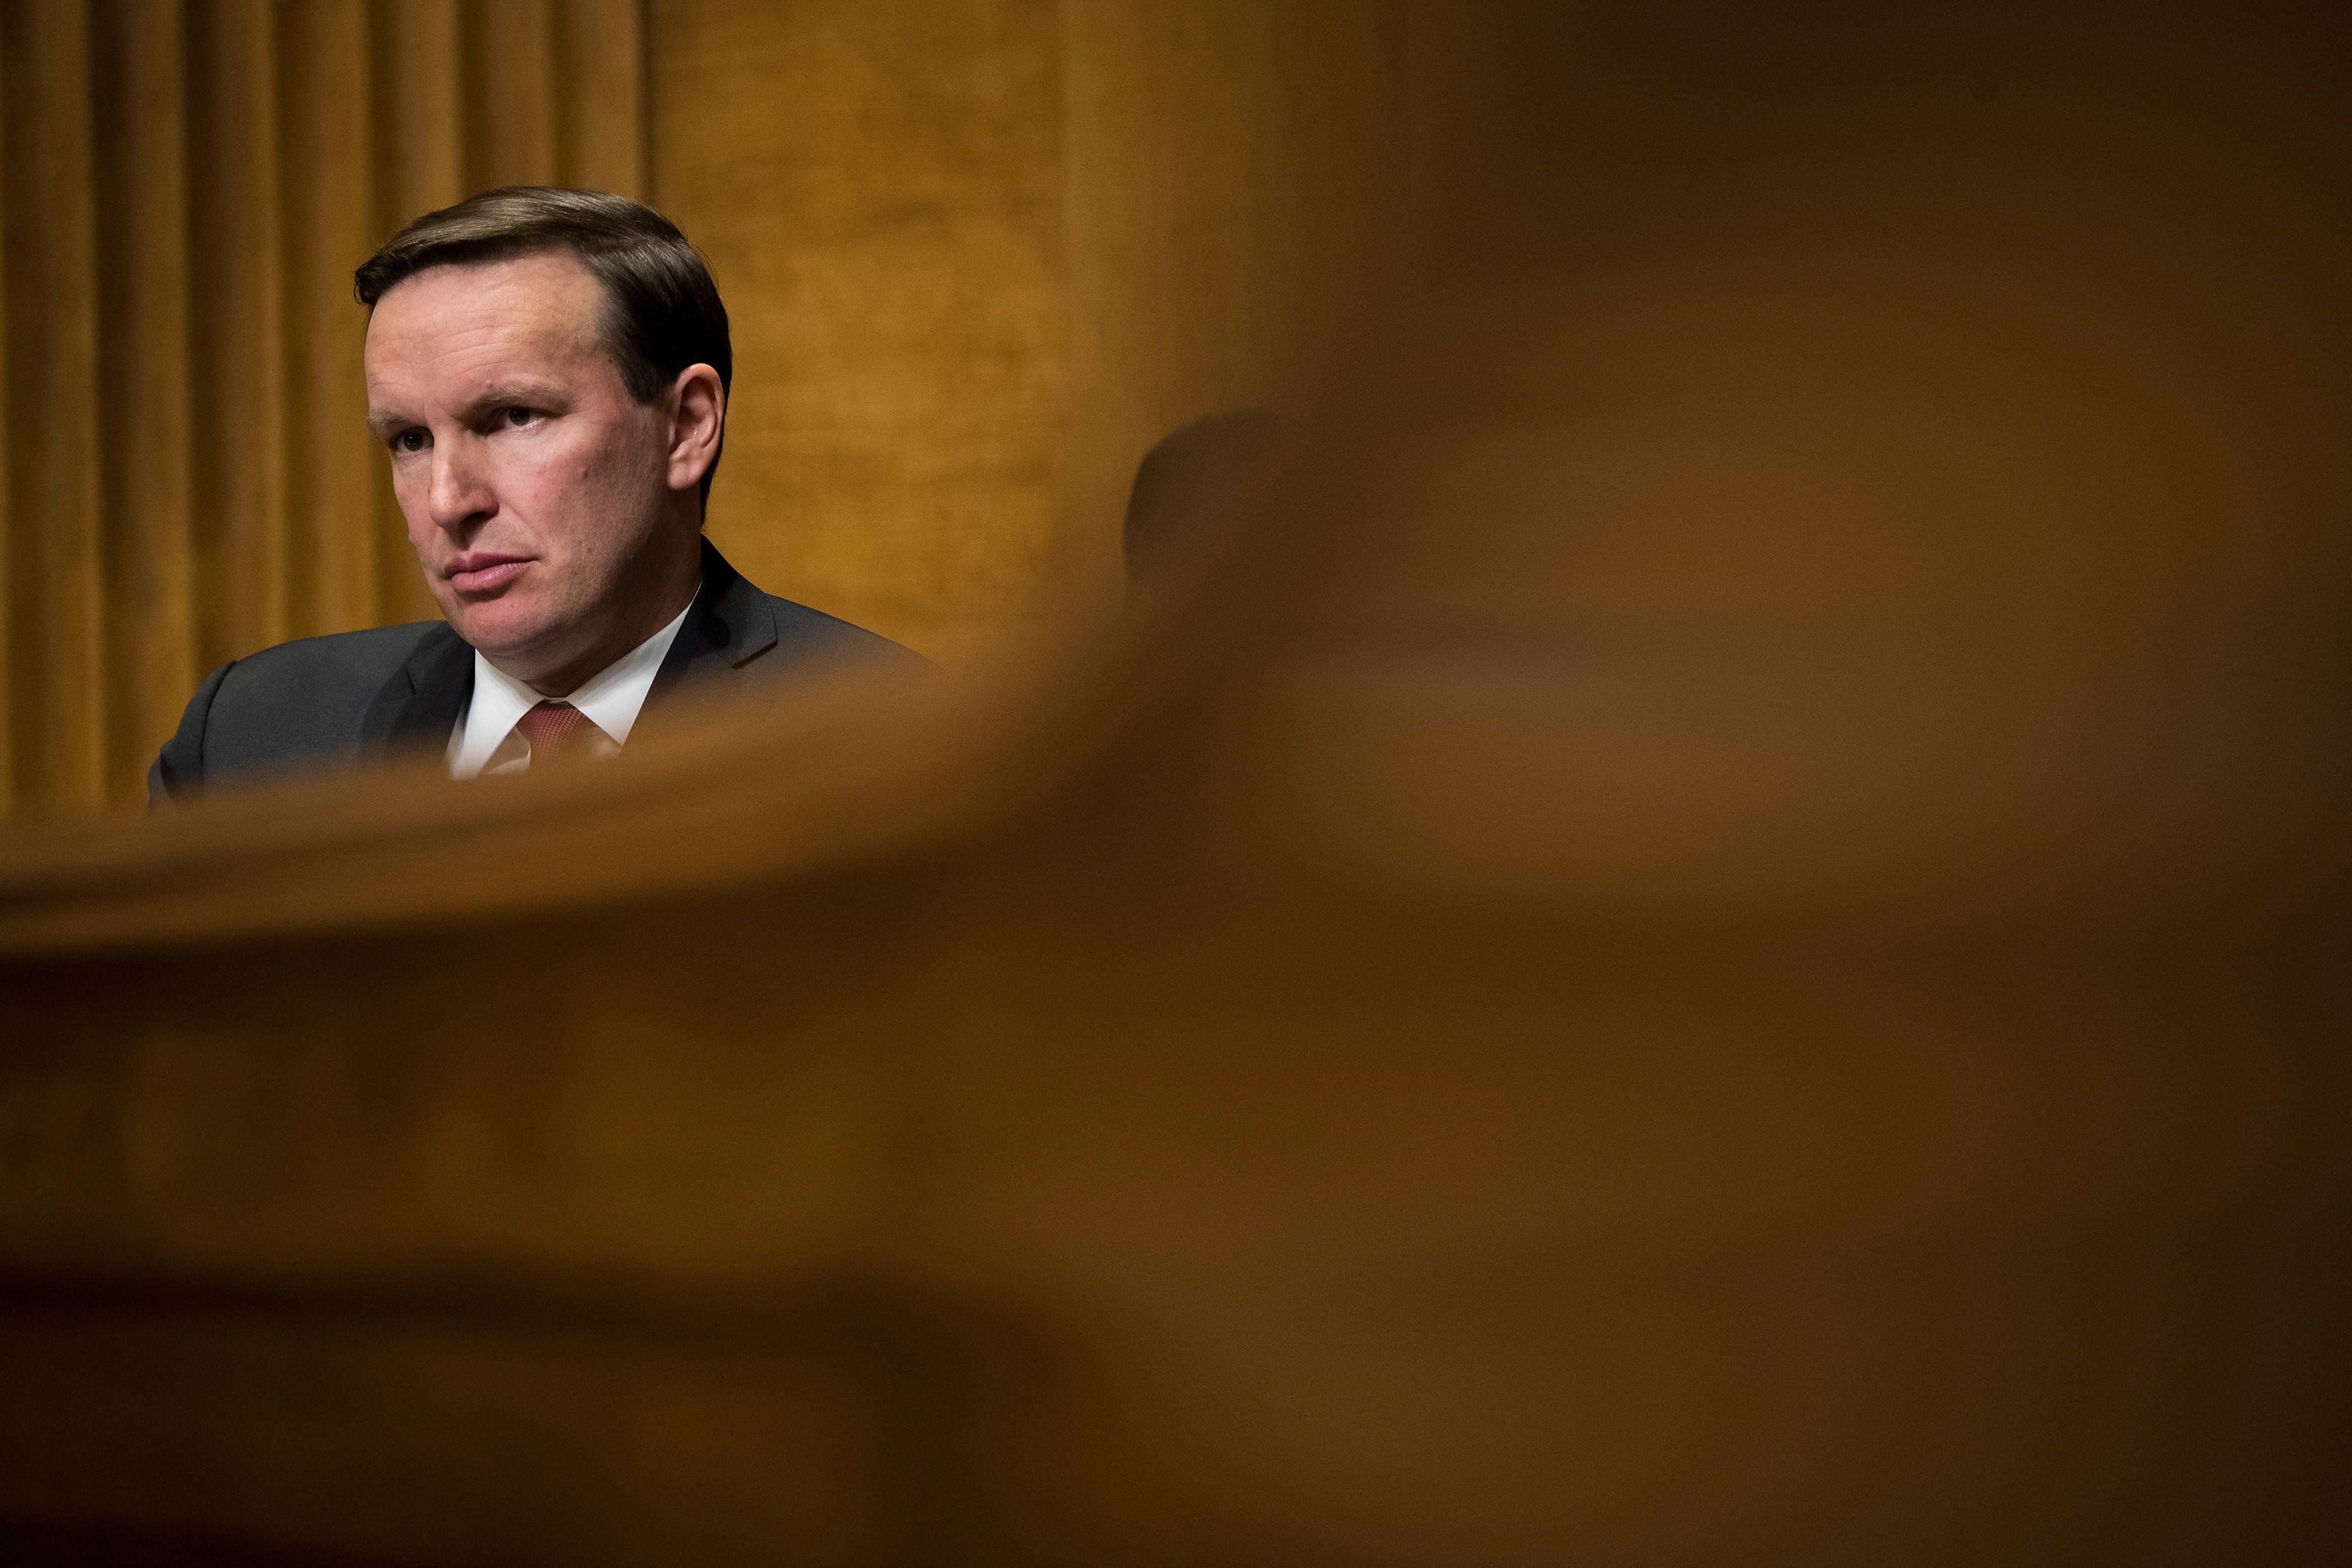 Sen. Chris Murphy (D-CT) listens to testimony during a Senate Foreign Relations Committee hearing on Dec. 6, 2017 in Washington, D.C. (Drew Angerer—Getty Images)